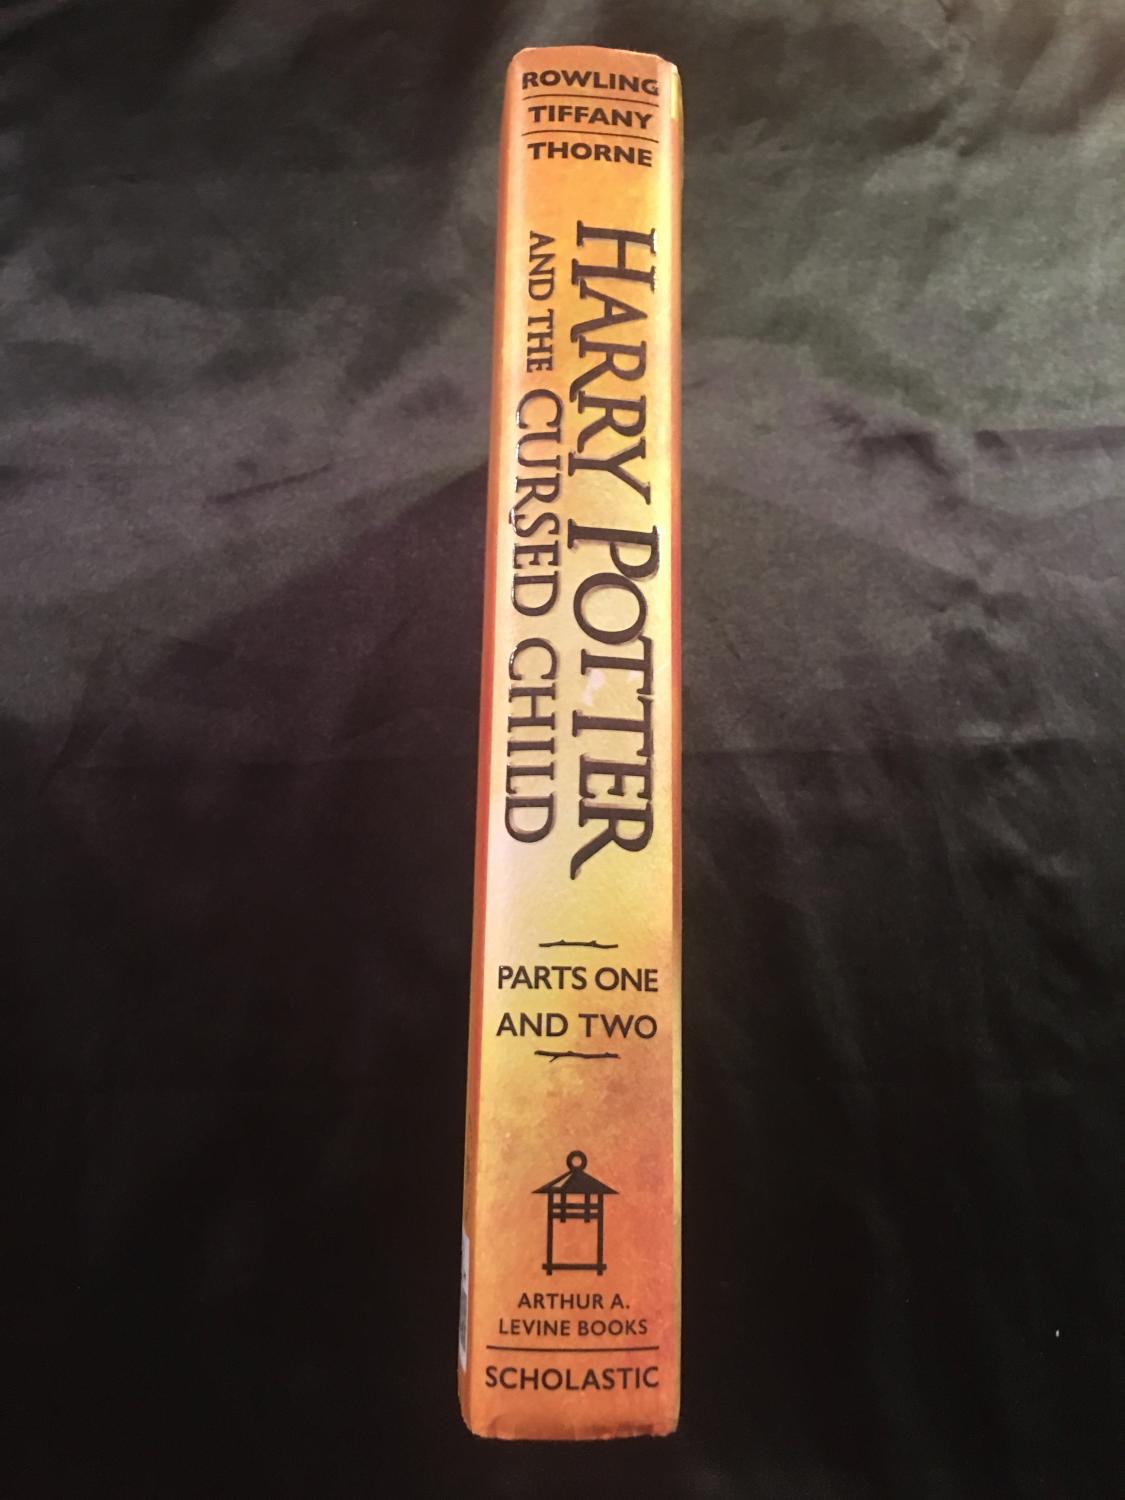 Scholastic Harry Potter and the Cursed Child: Parts One and Two Playscript  (Paperback) - by J. K. Rowling & John Tiffany & Jack Thorne 1 ct